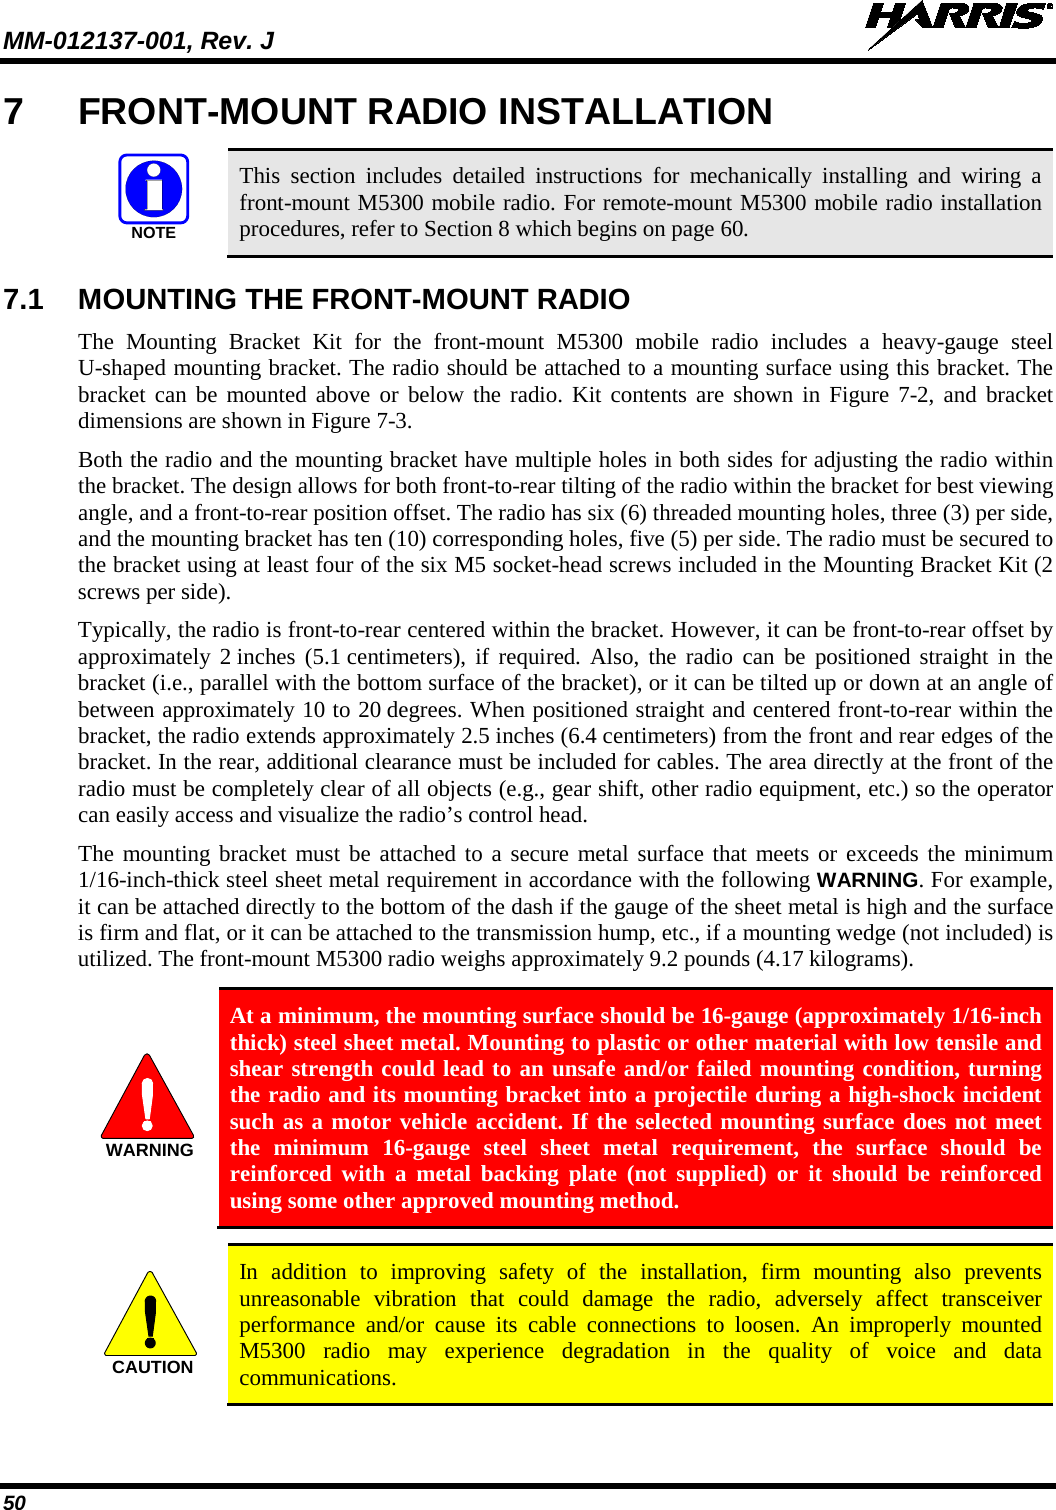 MM-012137-001, Rev. J   50 7  FRONT-MOUNT RADIO INSTALLATION   This section includes detailed instructions for mechanically installing and wiring a front-mount M5300 mobile radio. For remote-mount M5300 mobile radio installation procedures, refer to Section 8 which begins on page 60.  7.1 MOUNTING THE FRONT-MOUNT RADIO The  Mounting Bracket Kit for the front-mount  M5300  mobile radio includes a heavy-gauge steel U-shaped mounting bracket. The radio should be attached to a mounting surface using this bracket. The bracket can be mounted above or below the radio. Kit contents are shown in Figure 7-2, and bracket dimensions are shown in Figure 7-3. Both the radio and the mounting bracket have multiple holes in both sides for adjusting the radio within the bracket. The design allows for both front-to-rear tilting of the radio within the bracket for best viewing angle, and a front-to-rear position offset. The radio has six (6) threaded mounting holes, three (3) per side, and the mounting bracket has ten (10) corresponding holes, five (5) per side. The radio must be secured to the bracket using at least four of the six M5 socket-head screws included in the Mounting Bracket Kit (2 screws per side). Typically, the radio is front-to-rear centered within the bracket. However, it can be front-to-rear offset by approximately 2 inches (5.1 centimeters),  if required. Also, the radio can be positioned straight  in the bracket (i.e., parallel with the bottom surface of the bracket), or it can be tilted up or down at an angle of between approximately 10 to 20 degrees. When positioned straight and centered front-to-rear within the bracket, the radio extends approximately 2.5 inches (6.4 centimeters) from the front and rear edges of the bracket. In the rear, additional clearance must be included for cables. The area directly at the front of the radio must be completely clear of all objects (e.g., gear shift, other radio equipment, etc.) so the operator can easily access and visualize the radio’s control head. The mounting bracket must be attached to a secure metal surface that meets or exceeds the minimum 1/16-inch-thick steel sheet metal requirement in accordance with the following WARNING. For example, it can be attached directly to the bottom of the dash if the gauge of the sheet metal is high and the surface is firm and flat, or it can be attached to the transmission hump, etc., if a mounting wedge (not included) is utilized. The front-mount M5300 radio weighs approximately 9.2 pounds (4.17 kilograms).   At a minimum, the mounting surface should be 16-gauge (approximately 1/16-inch thick) steel sheet metal. Mounting to plastic or other material with low tensile and shear strength could lead to an unsafe and/or failed mounting condition, turning the radio and its mounting bracket into a projectile during a high-shock incident such as a motor vehicle accident. If the selected mounting surface does not meet the minimum 16-gauge steel sheet metal requirement, the surface should be reinforced with a metal backing plate (not supplied) or it should be reinforced using some other approved mounting method.   In addition to improving safety of the installation, firm mounting also prevents unreasonable vibration that could damage the radio, adversely affect transceiver performance and/or cause its cable connections to loosen. An improperly mounted M5300 radio may experience degradation in the quality of voice and data communications.  NOTEWARNINGCAUTION